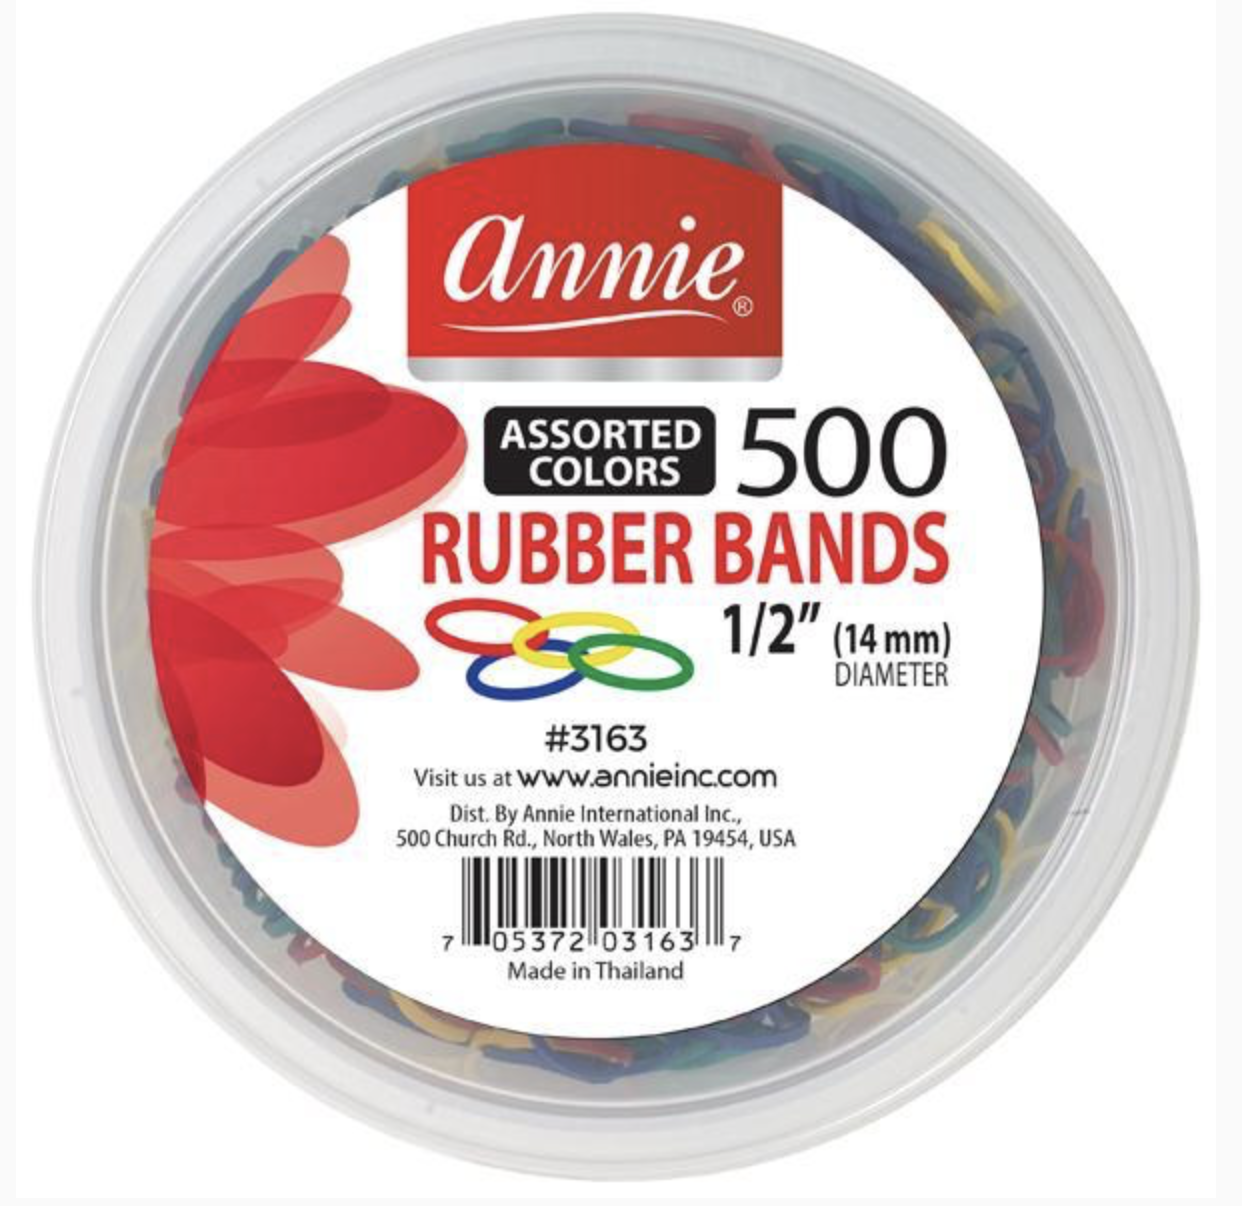 Annie 500 Rubberbands Assorted Colors #3163 - BPolished Beauty Supply